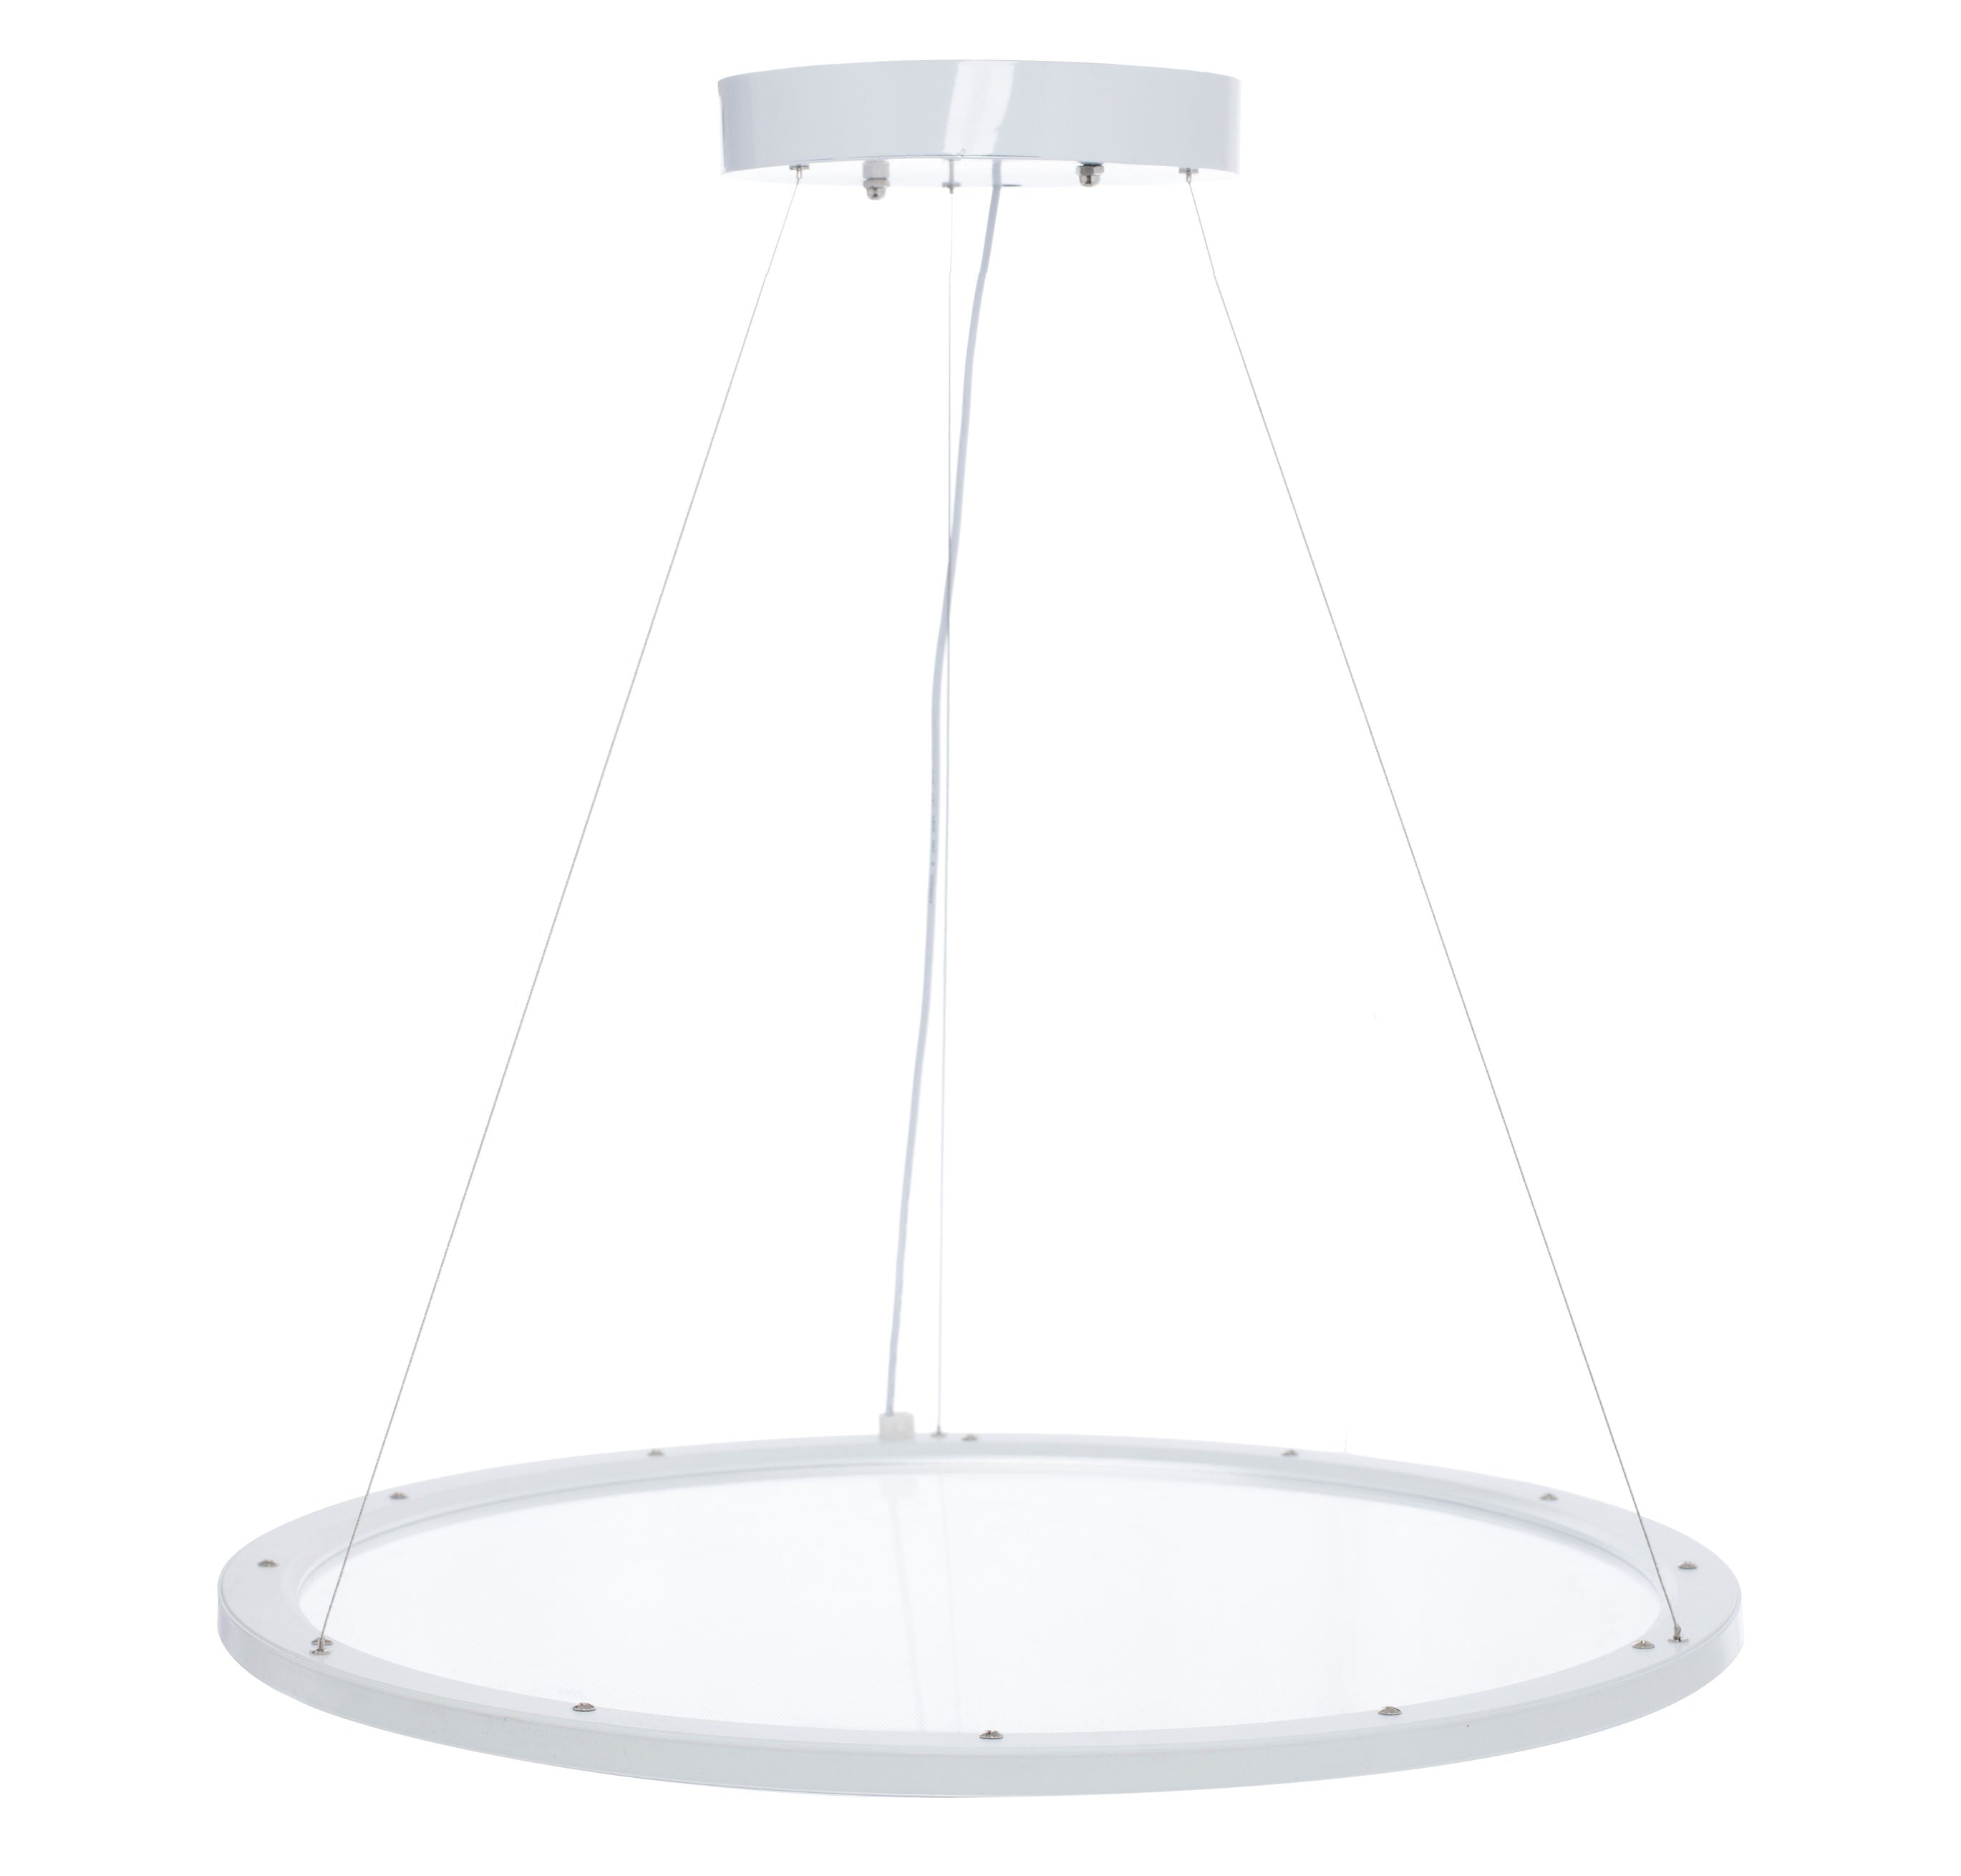 Westgate SRPL-40W-50K-D LED Suspended Up/Down Clear Round Panel Light - White